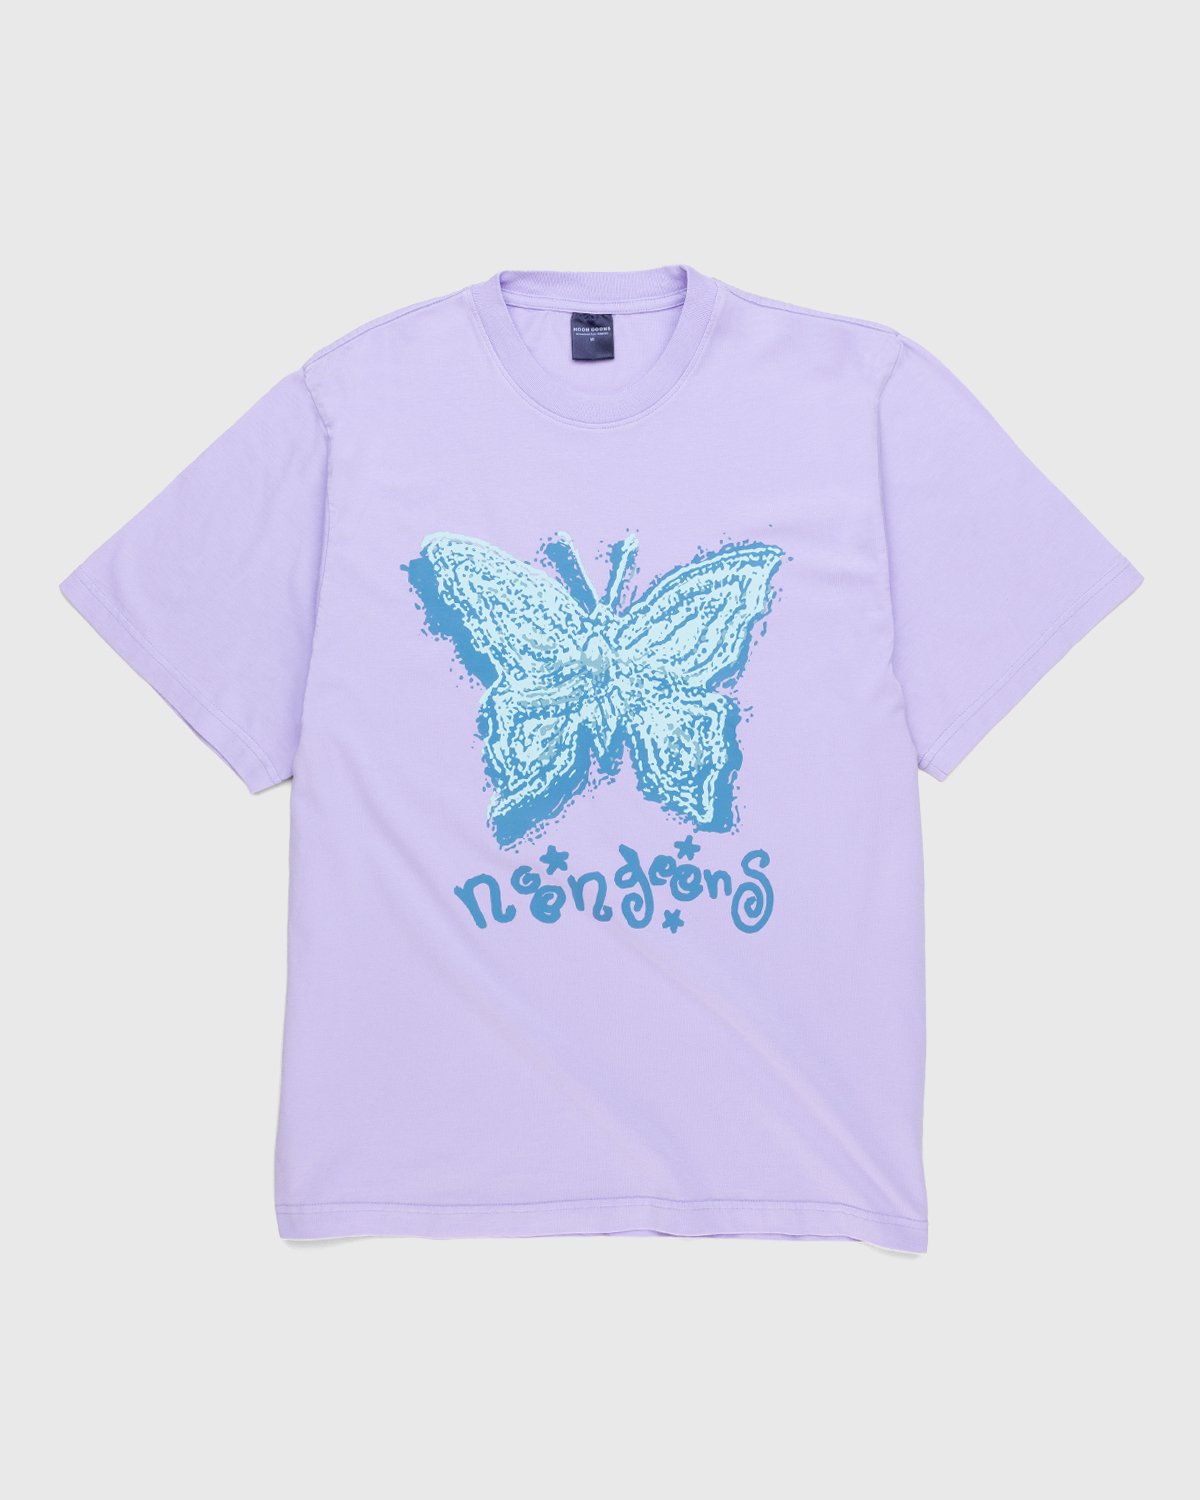 Noon Goons - Fly High T-Shirt Lavender - Clothing - Purple - Image 1